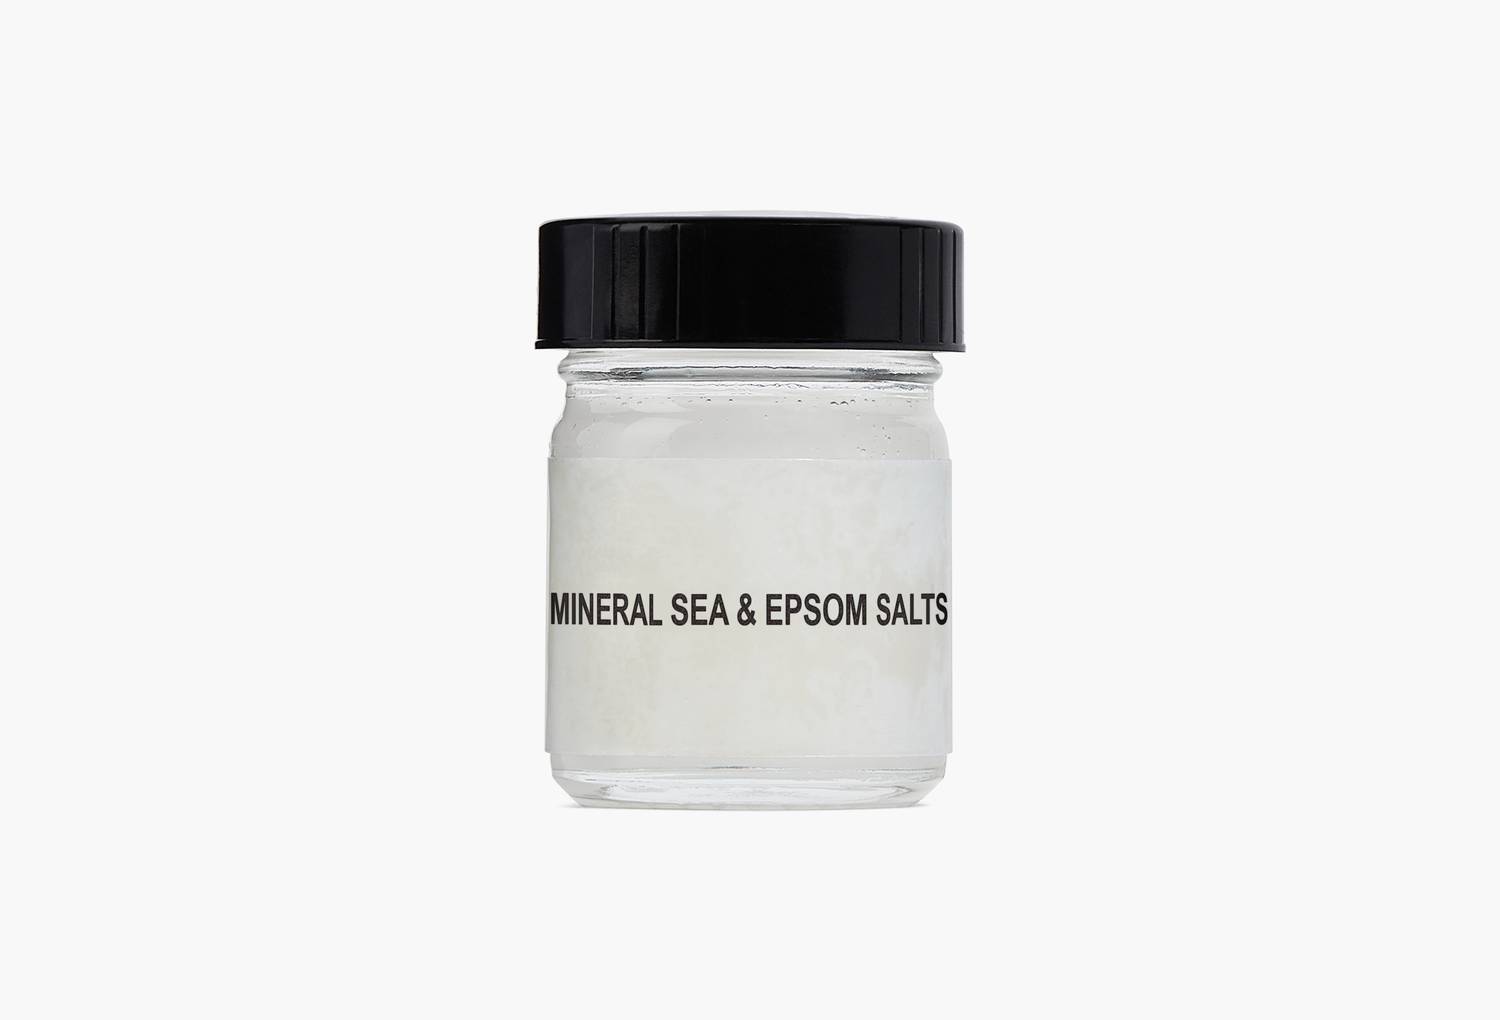 Mineral Sea and Epsom Salts in natural form